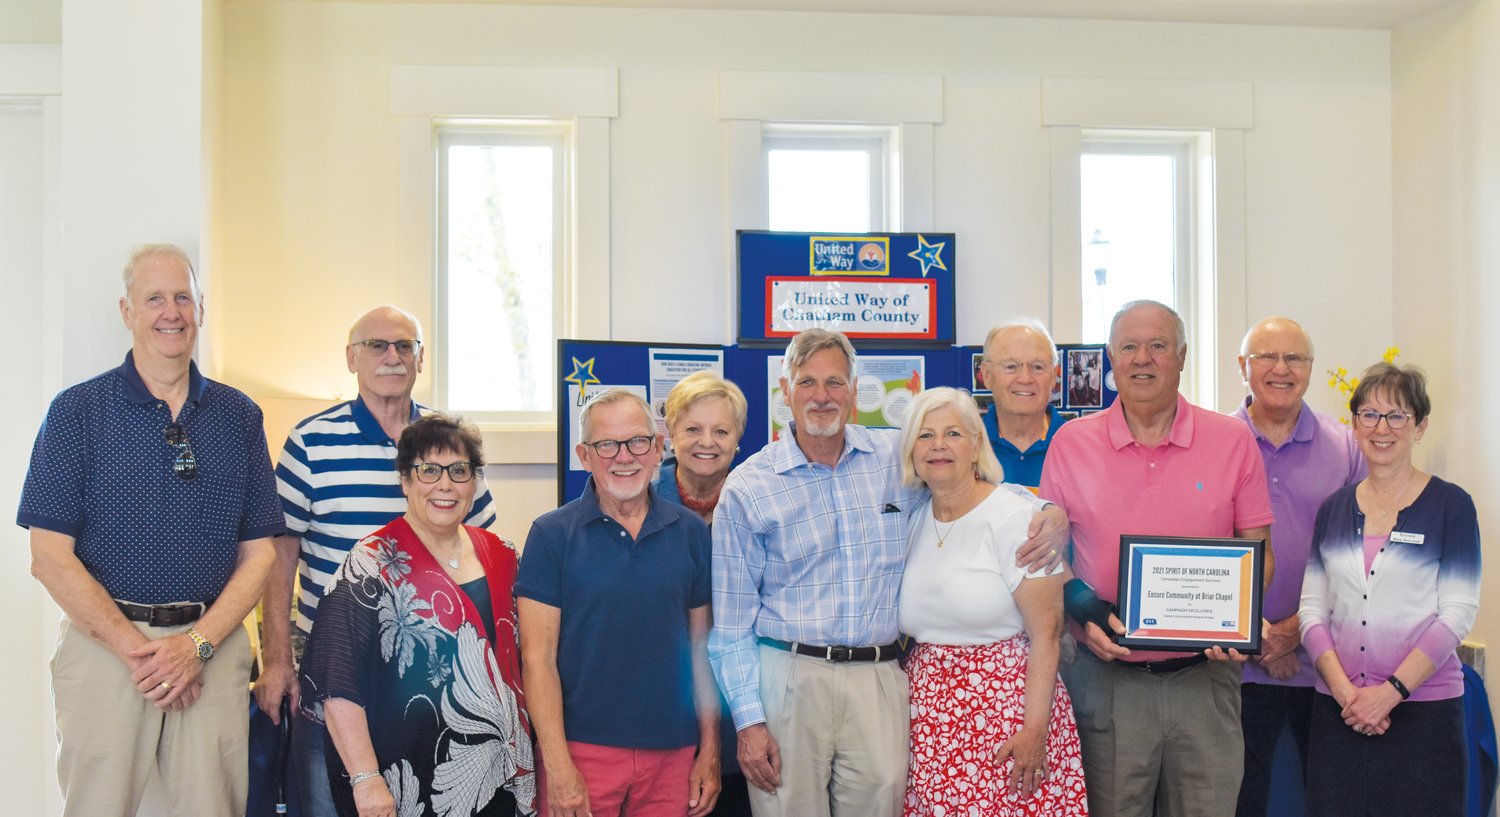 The captains for Encore at Briar Chapel's campaign, which helped the United Way gain more than 100 new donors. Pictured, from left, are Gary LaMar, Stu Rothman, Lisa Rothman, Roscoe McWilliams, Donna Buckley, Jeff York, Melanie York, Bill Buckley, John Hughes, Dave Mirkovich and Mary Ann Hale.